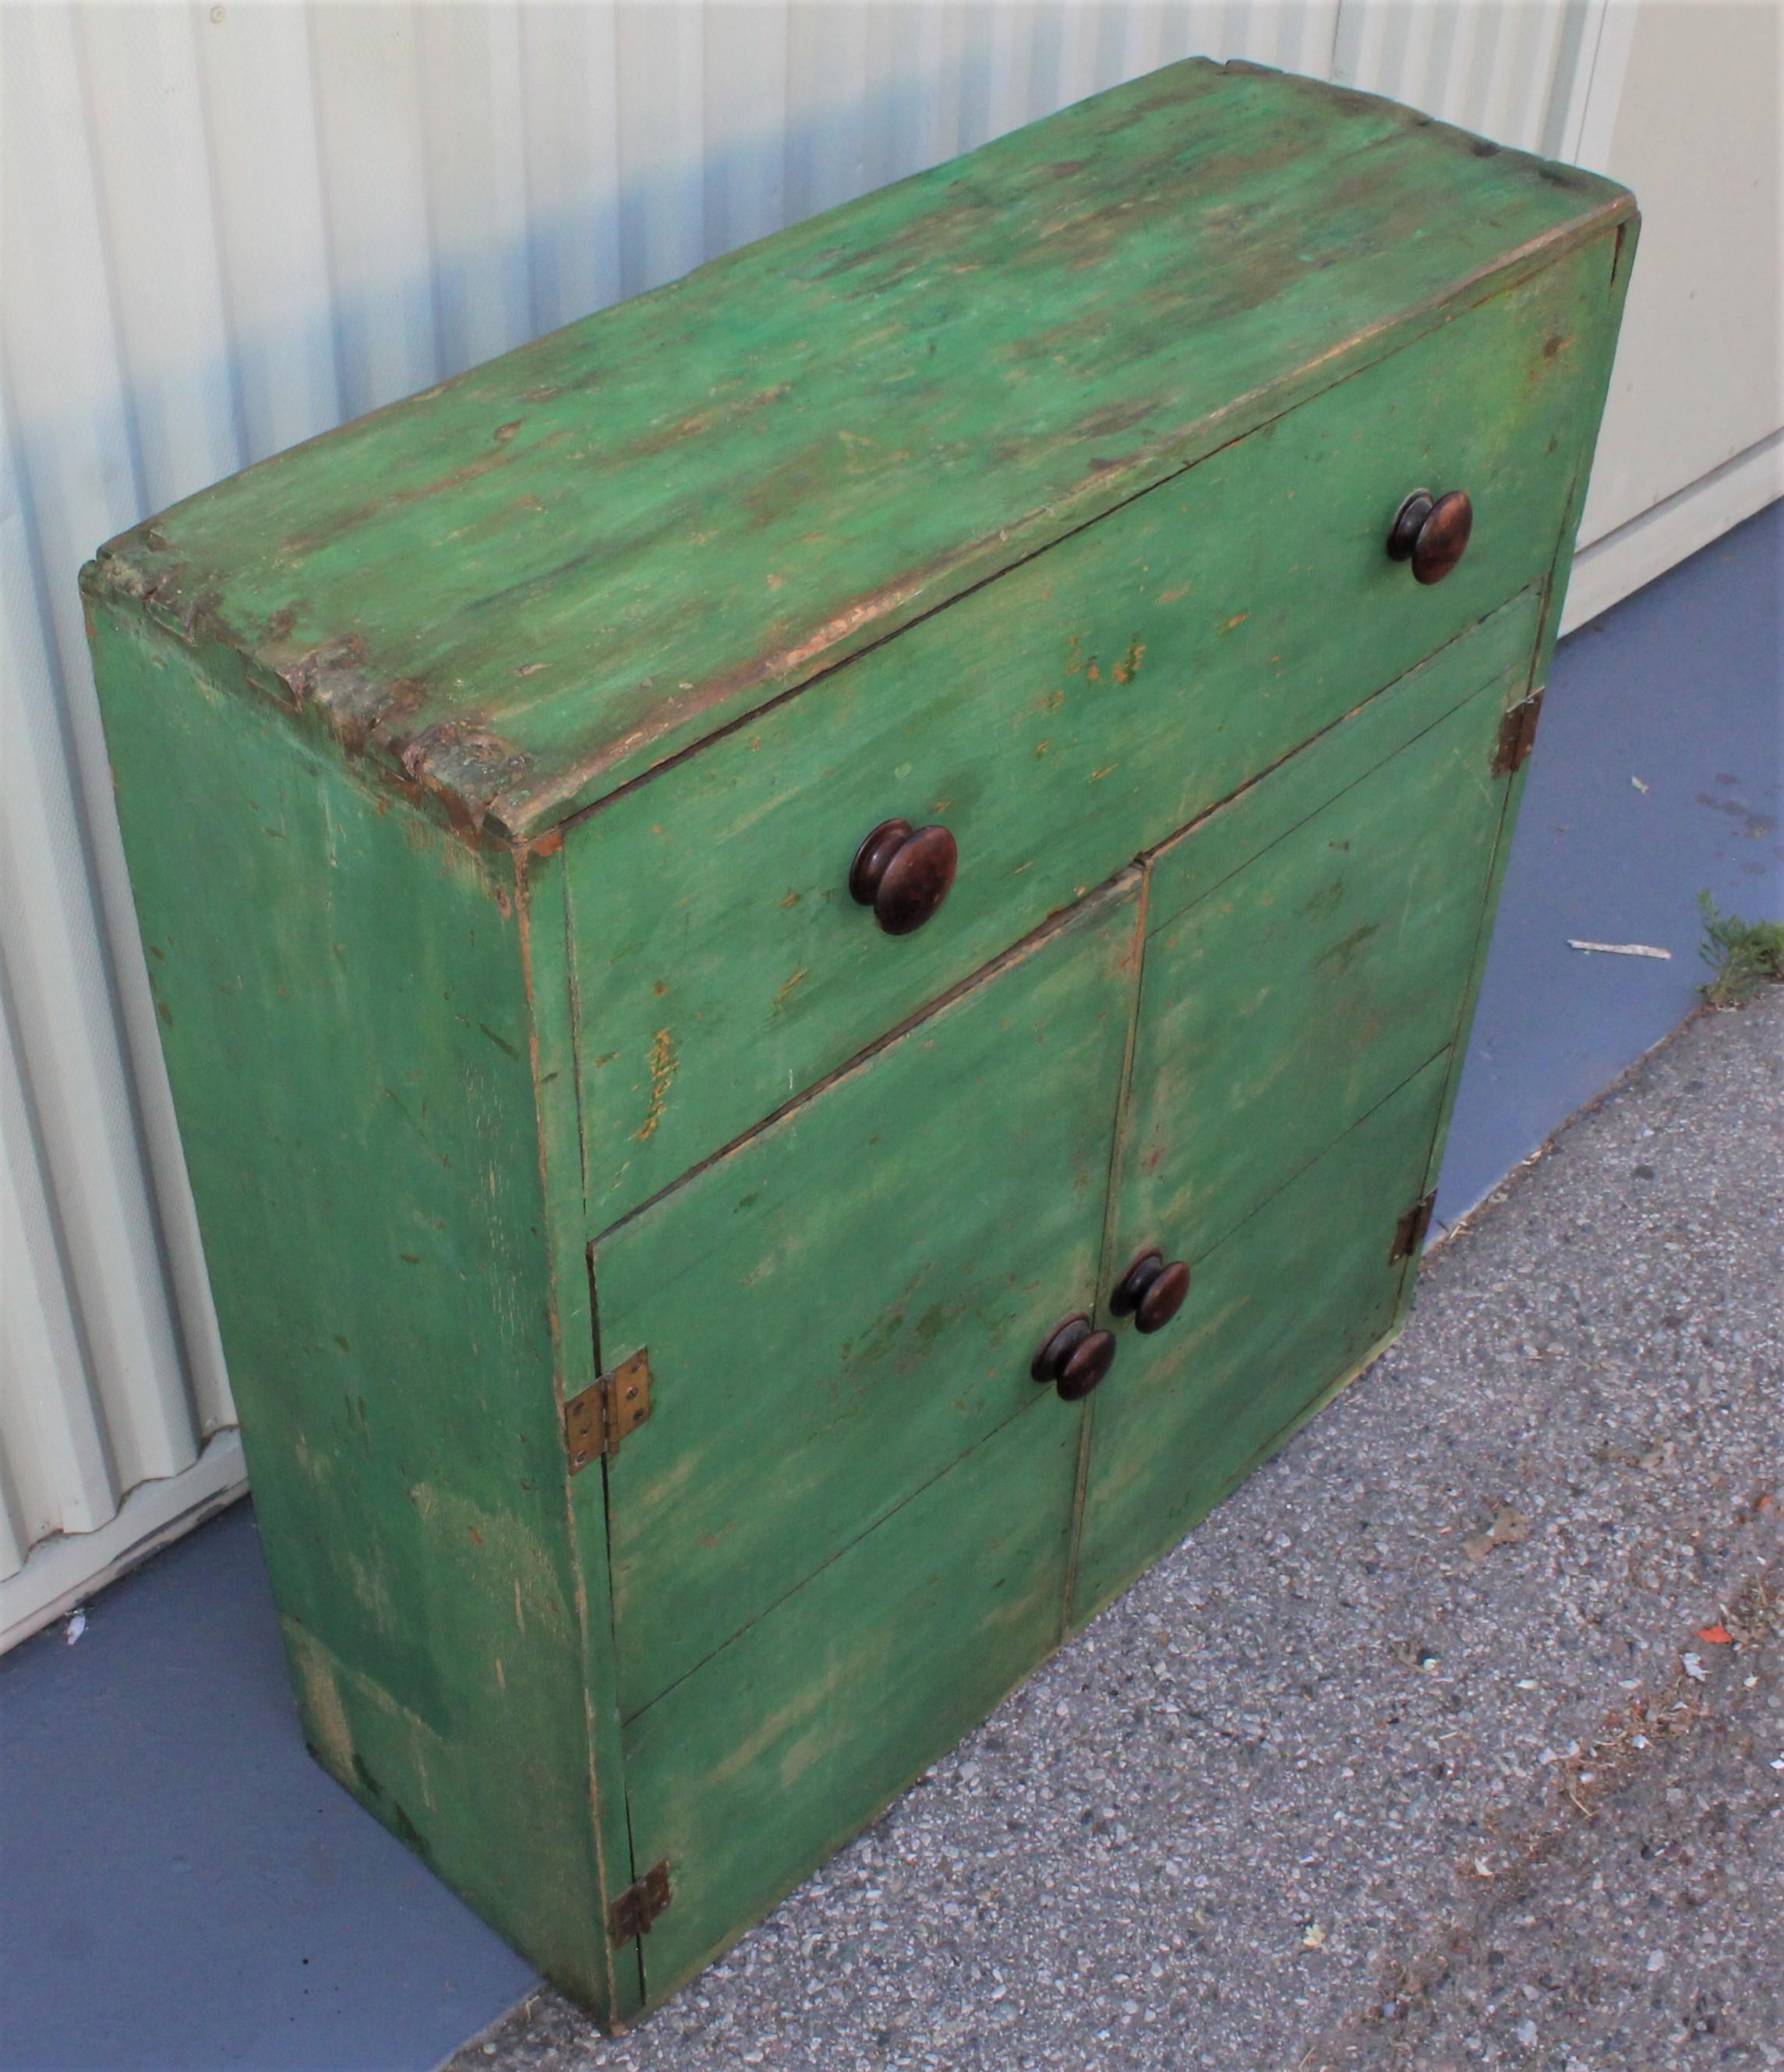 19th century original green painted dovetailed case cabinet from Pennsylvania. The condition is good with a over painted top of cabinet.